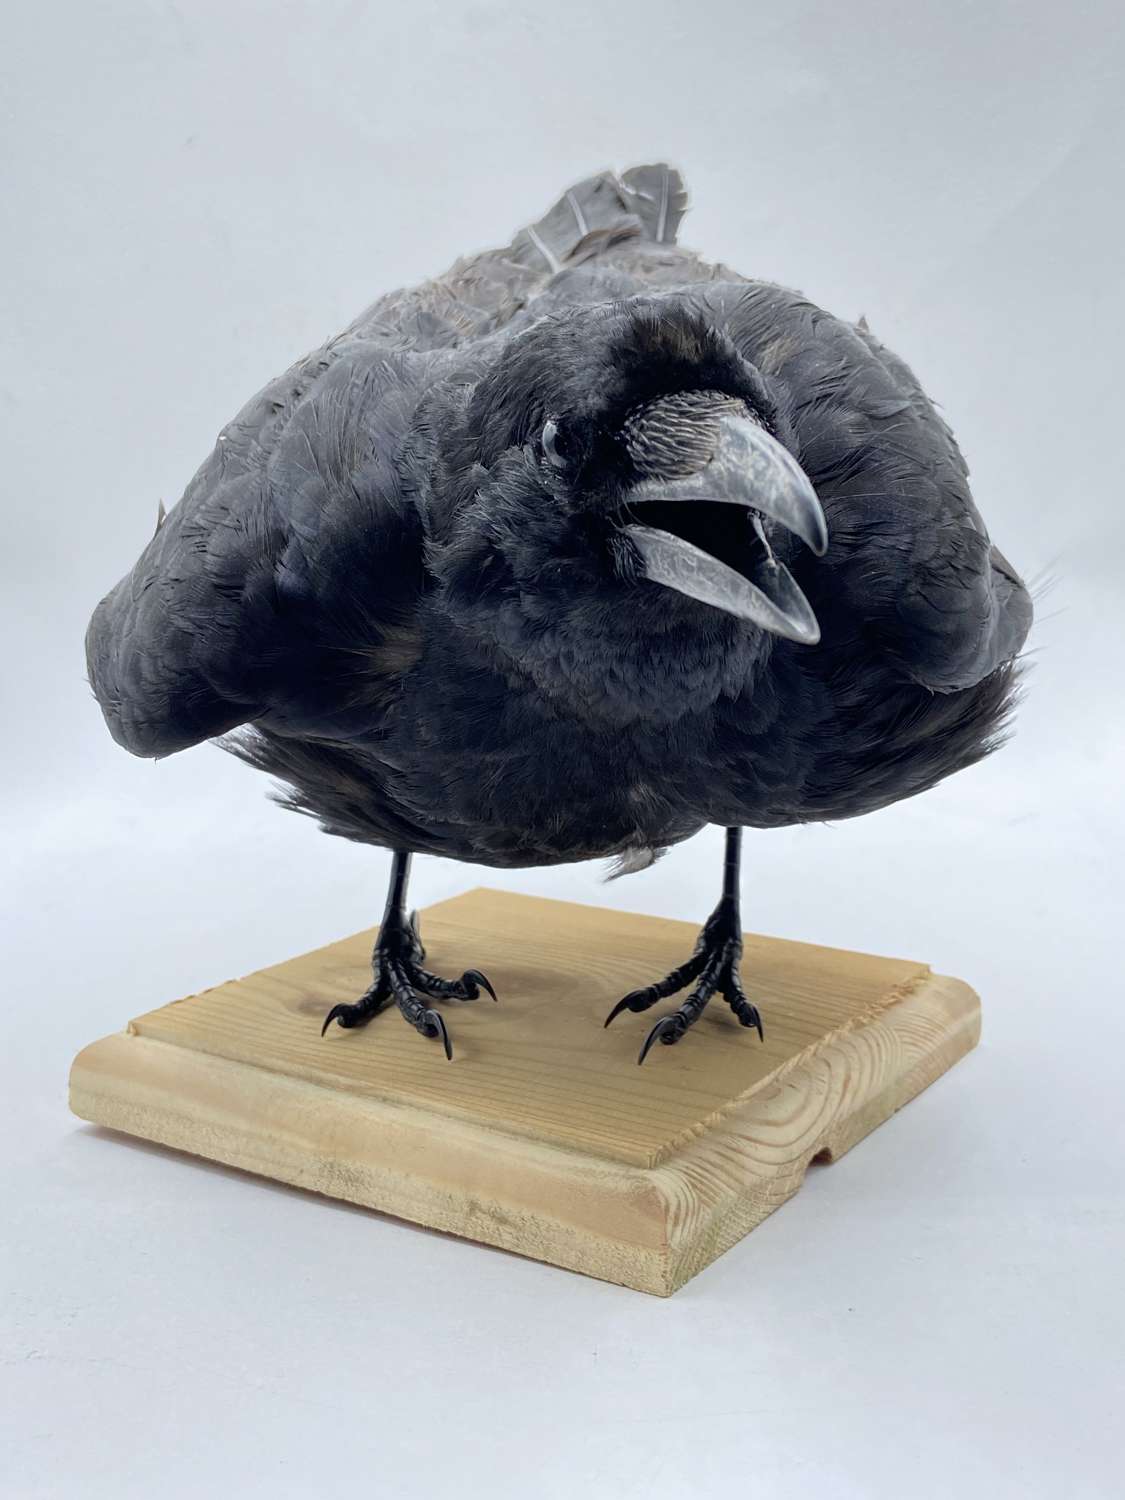 Vintage Gothic Squawking Mounted Taxidermy Carrion Crow (7)